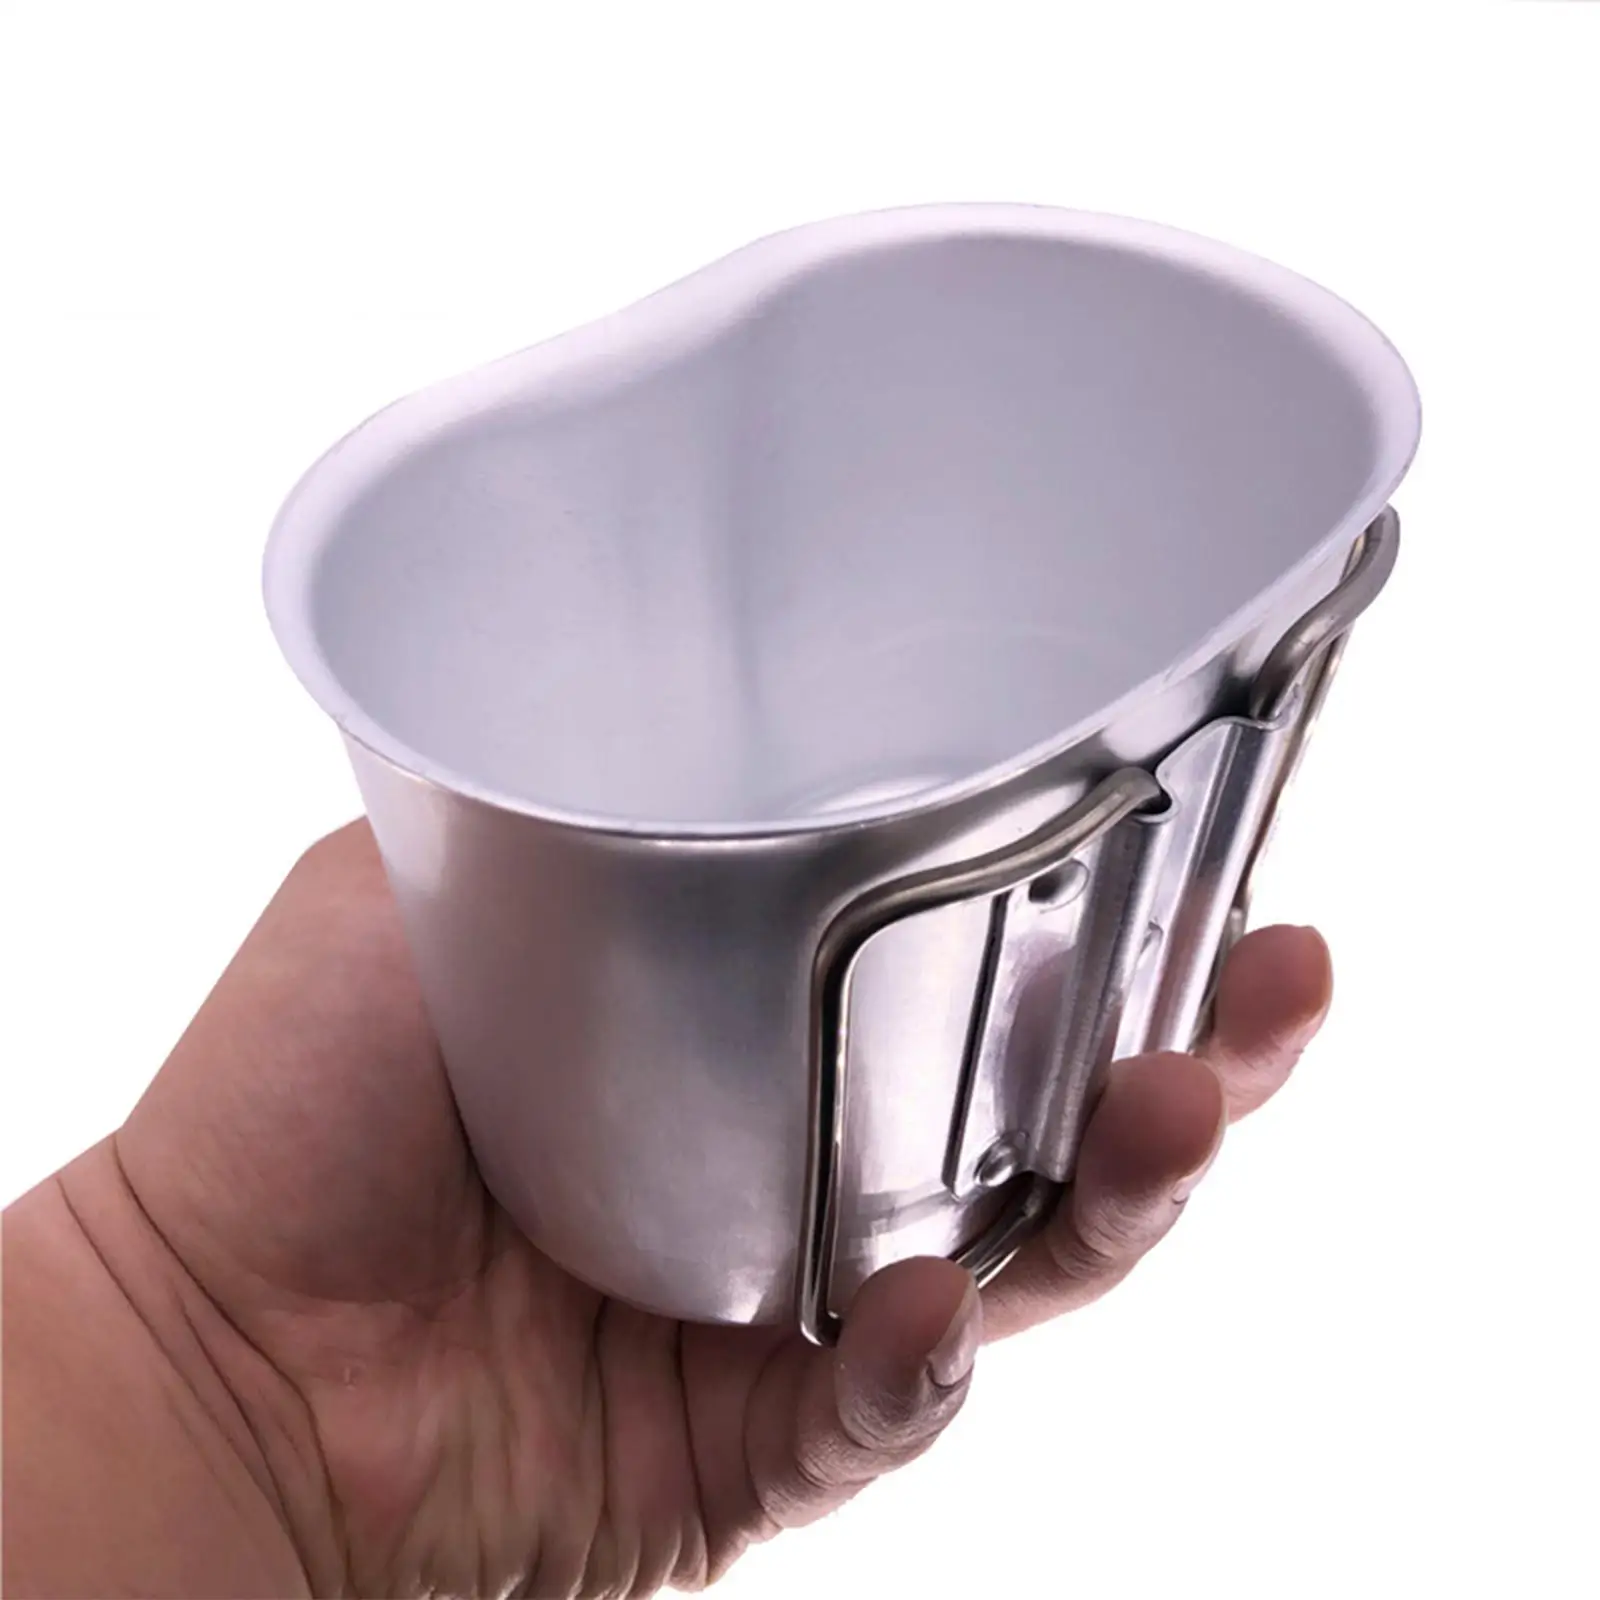 Multifunctional Camping Cookware Cup Lunchbox Foldable Handle Beer Mug Container 600ml Alloy for Hiking Outdoor Picnic Travel